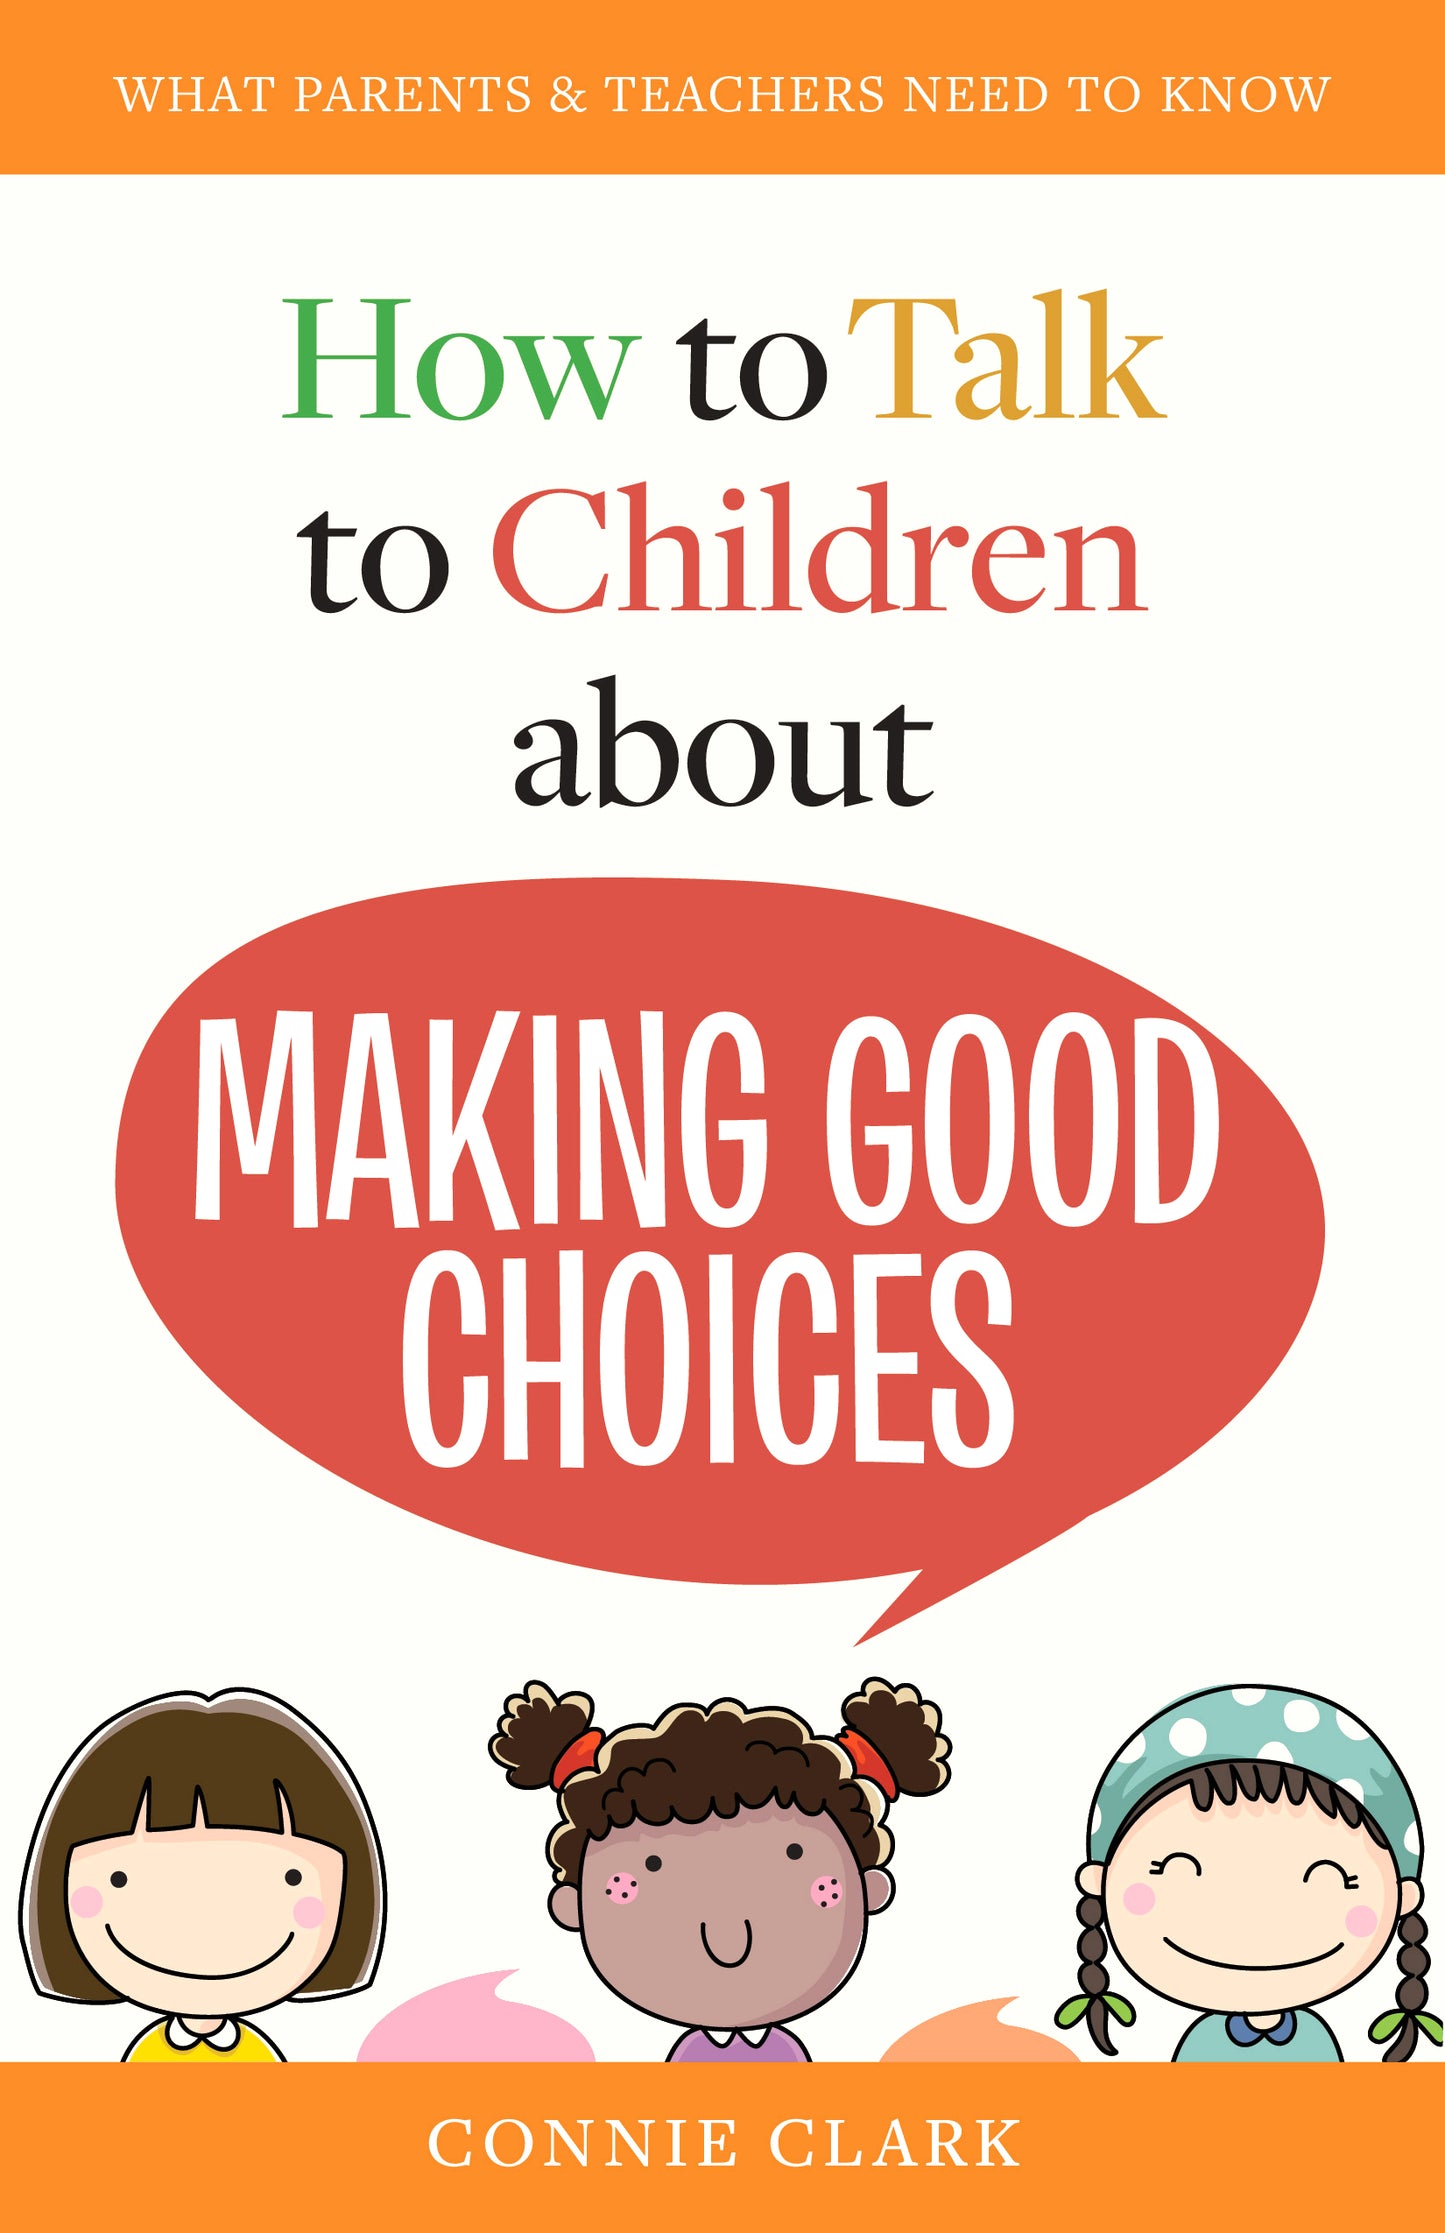 How to Talk to Children about Making Good Choices